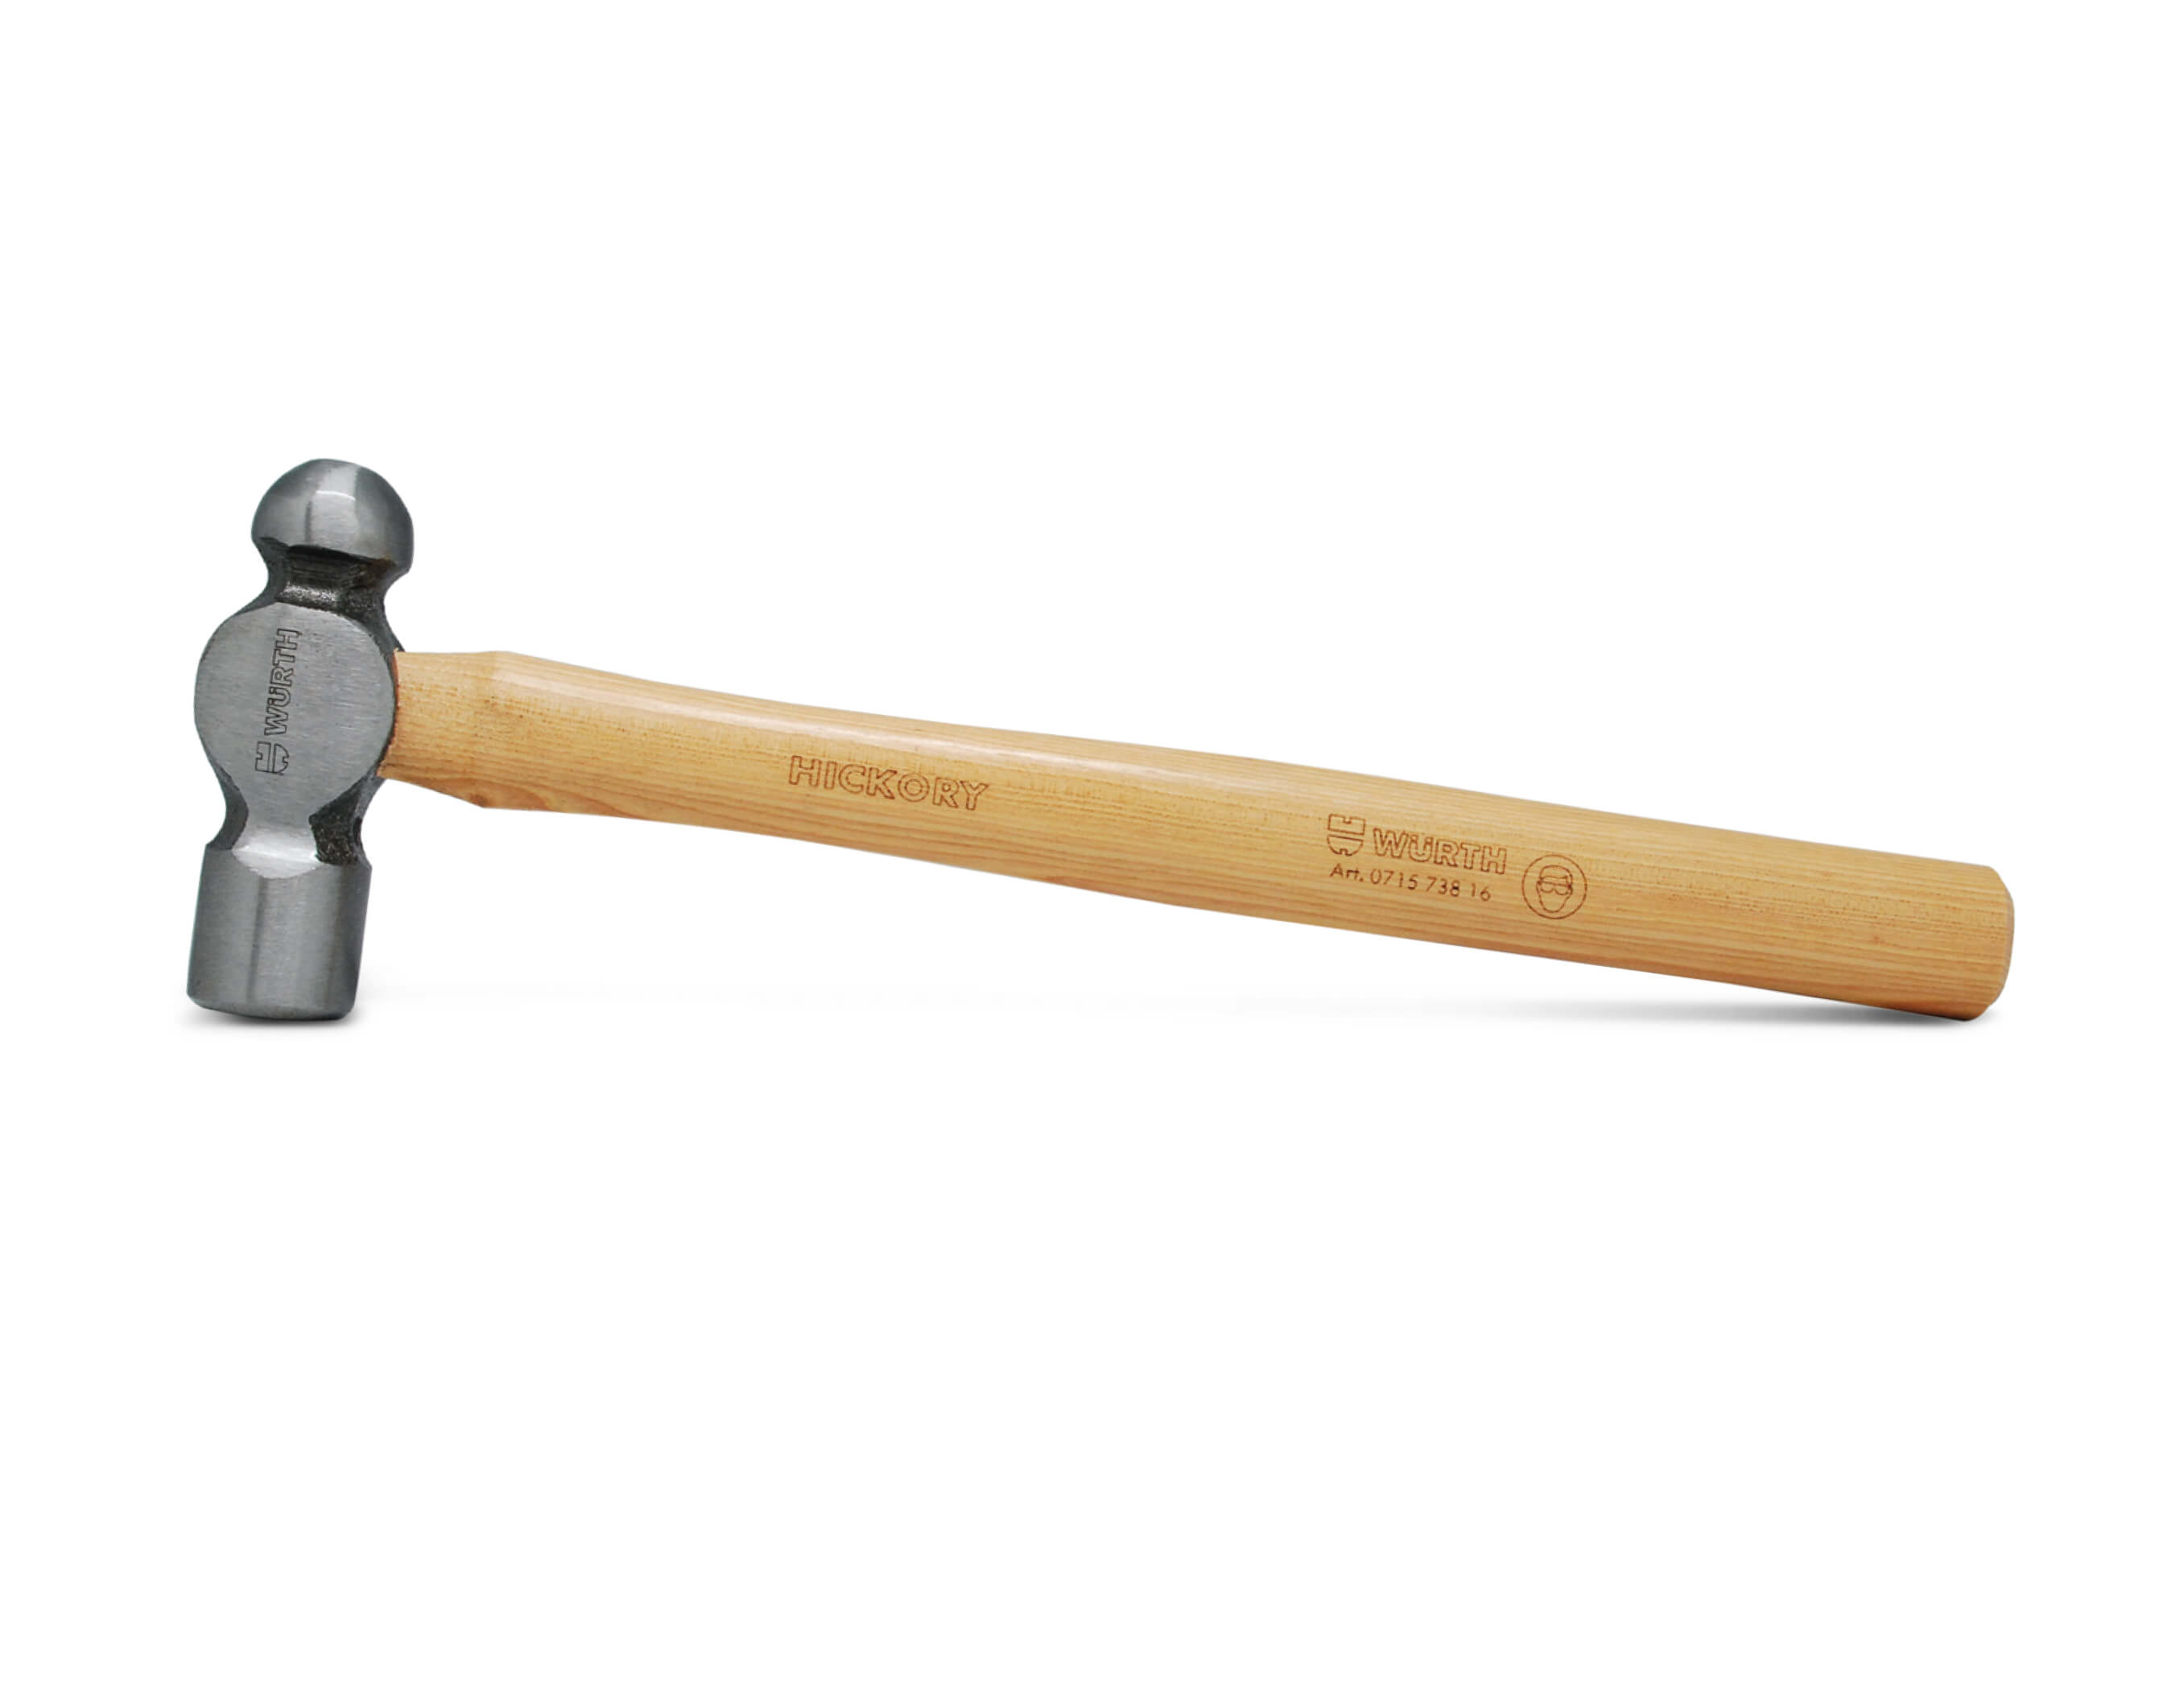 WEDO Titanium Ball Peen Hammer,8oz Ball Pein Hammer with Wooden  handle,Non-magnetic,Light Weight,Corrosion Resistant,Length  300mm,Rust-proof,One-time Die-forged, Ball-Peen Hammers -  Canada